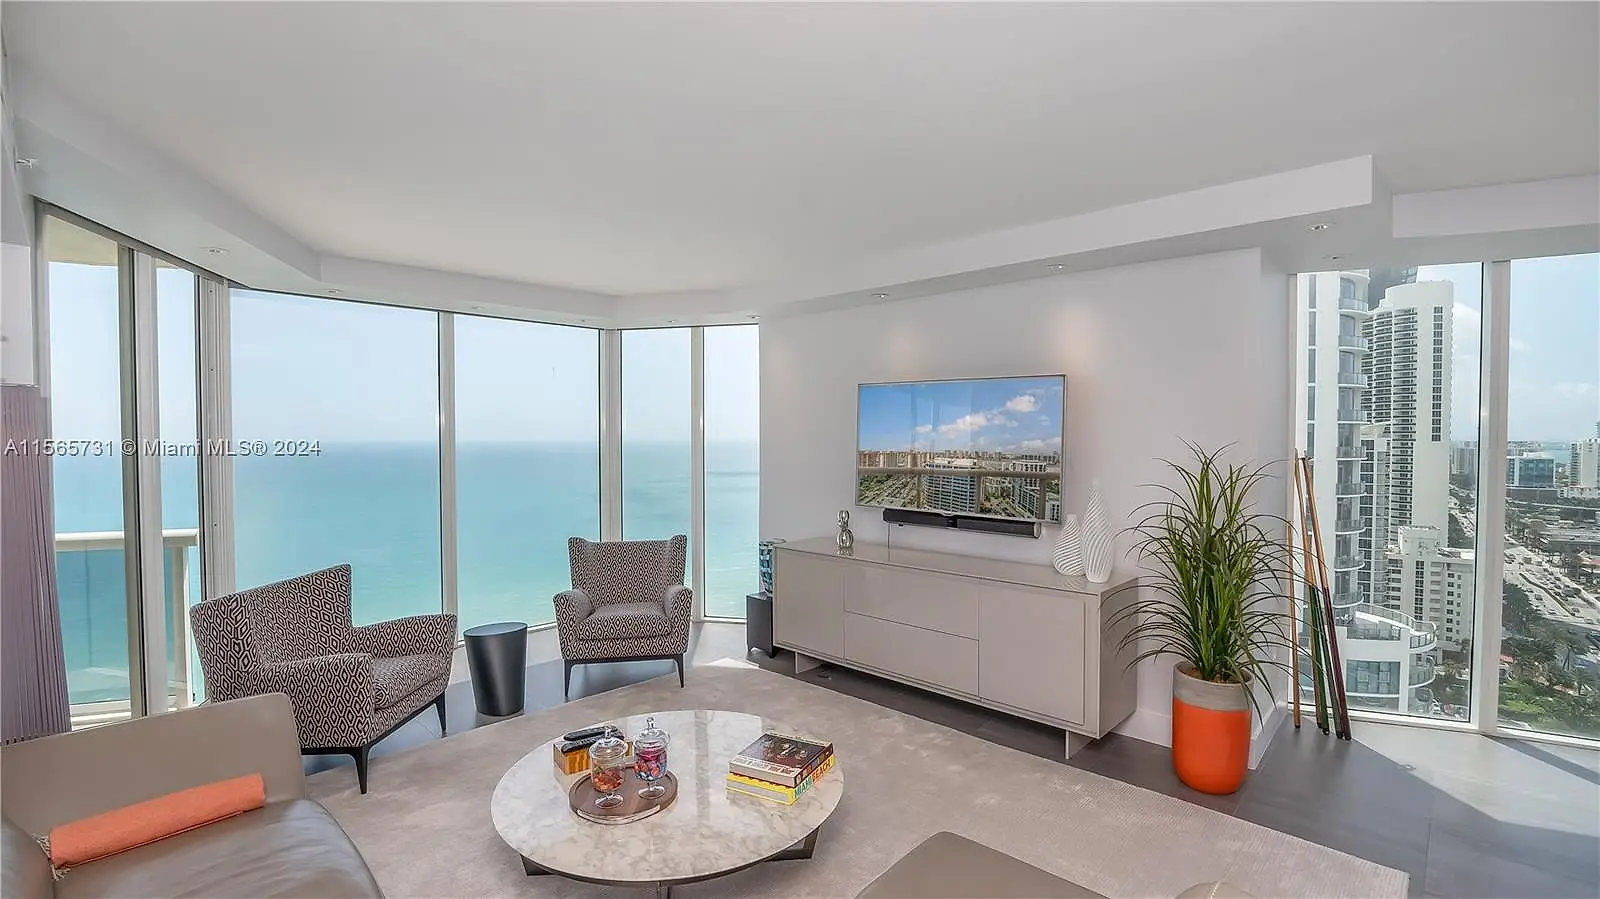 17555 Collins Ave (Avail 5/15-12/1)